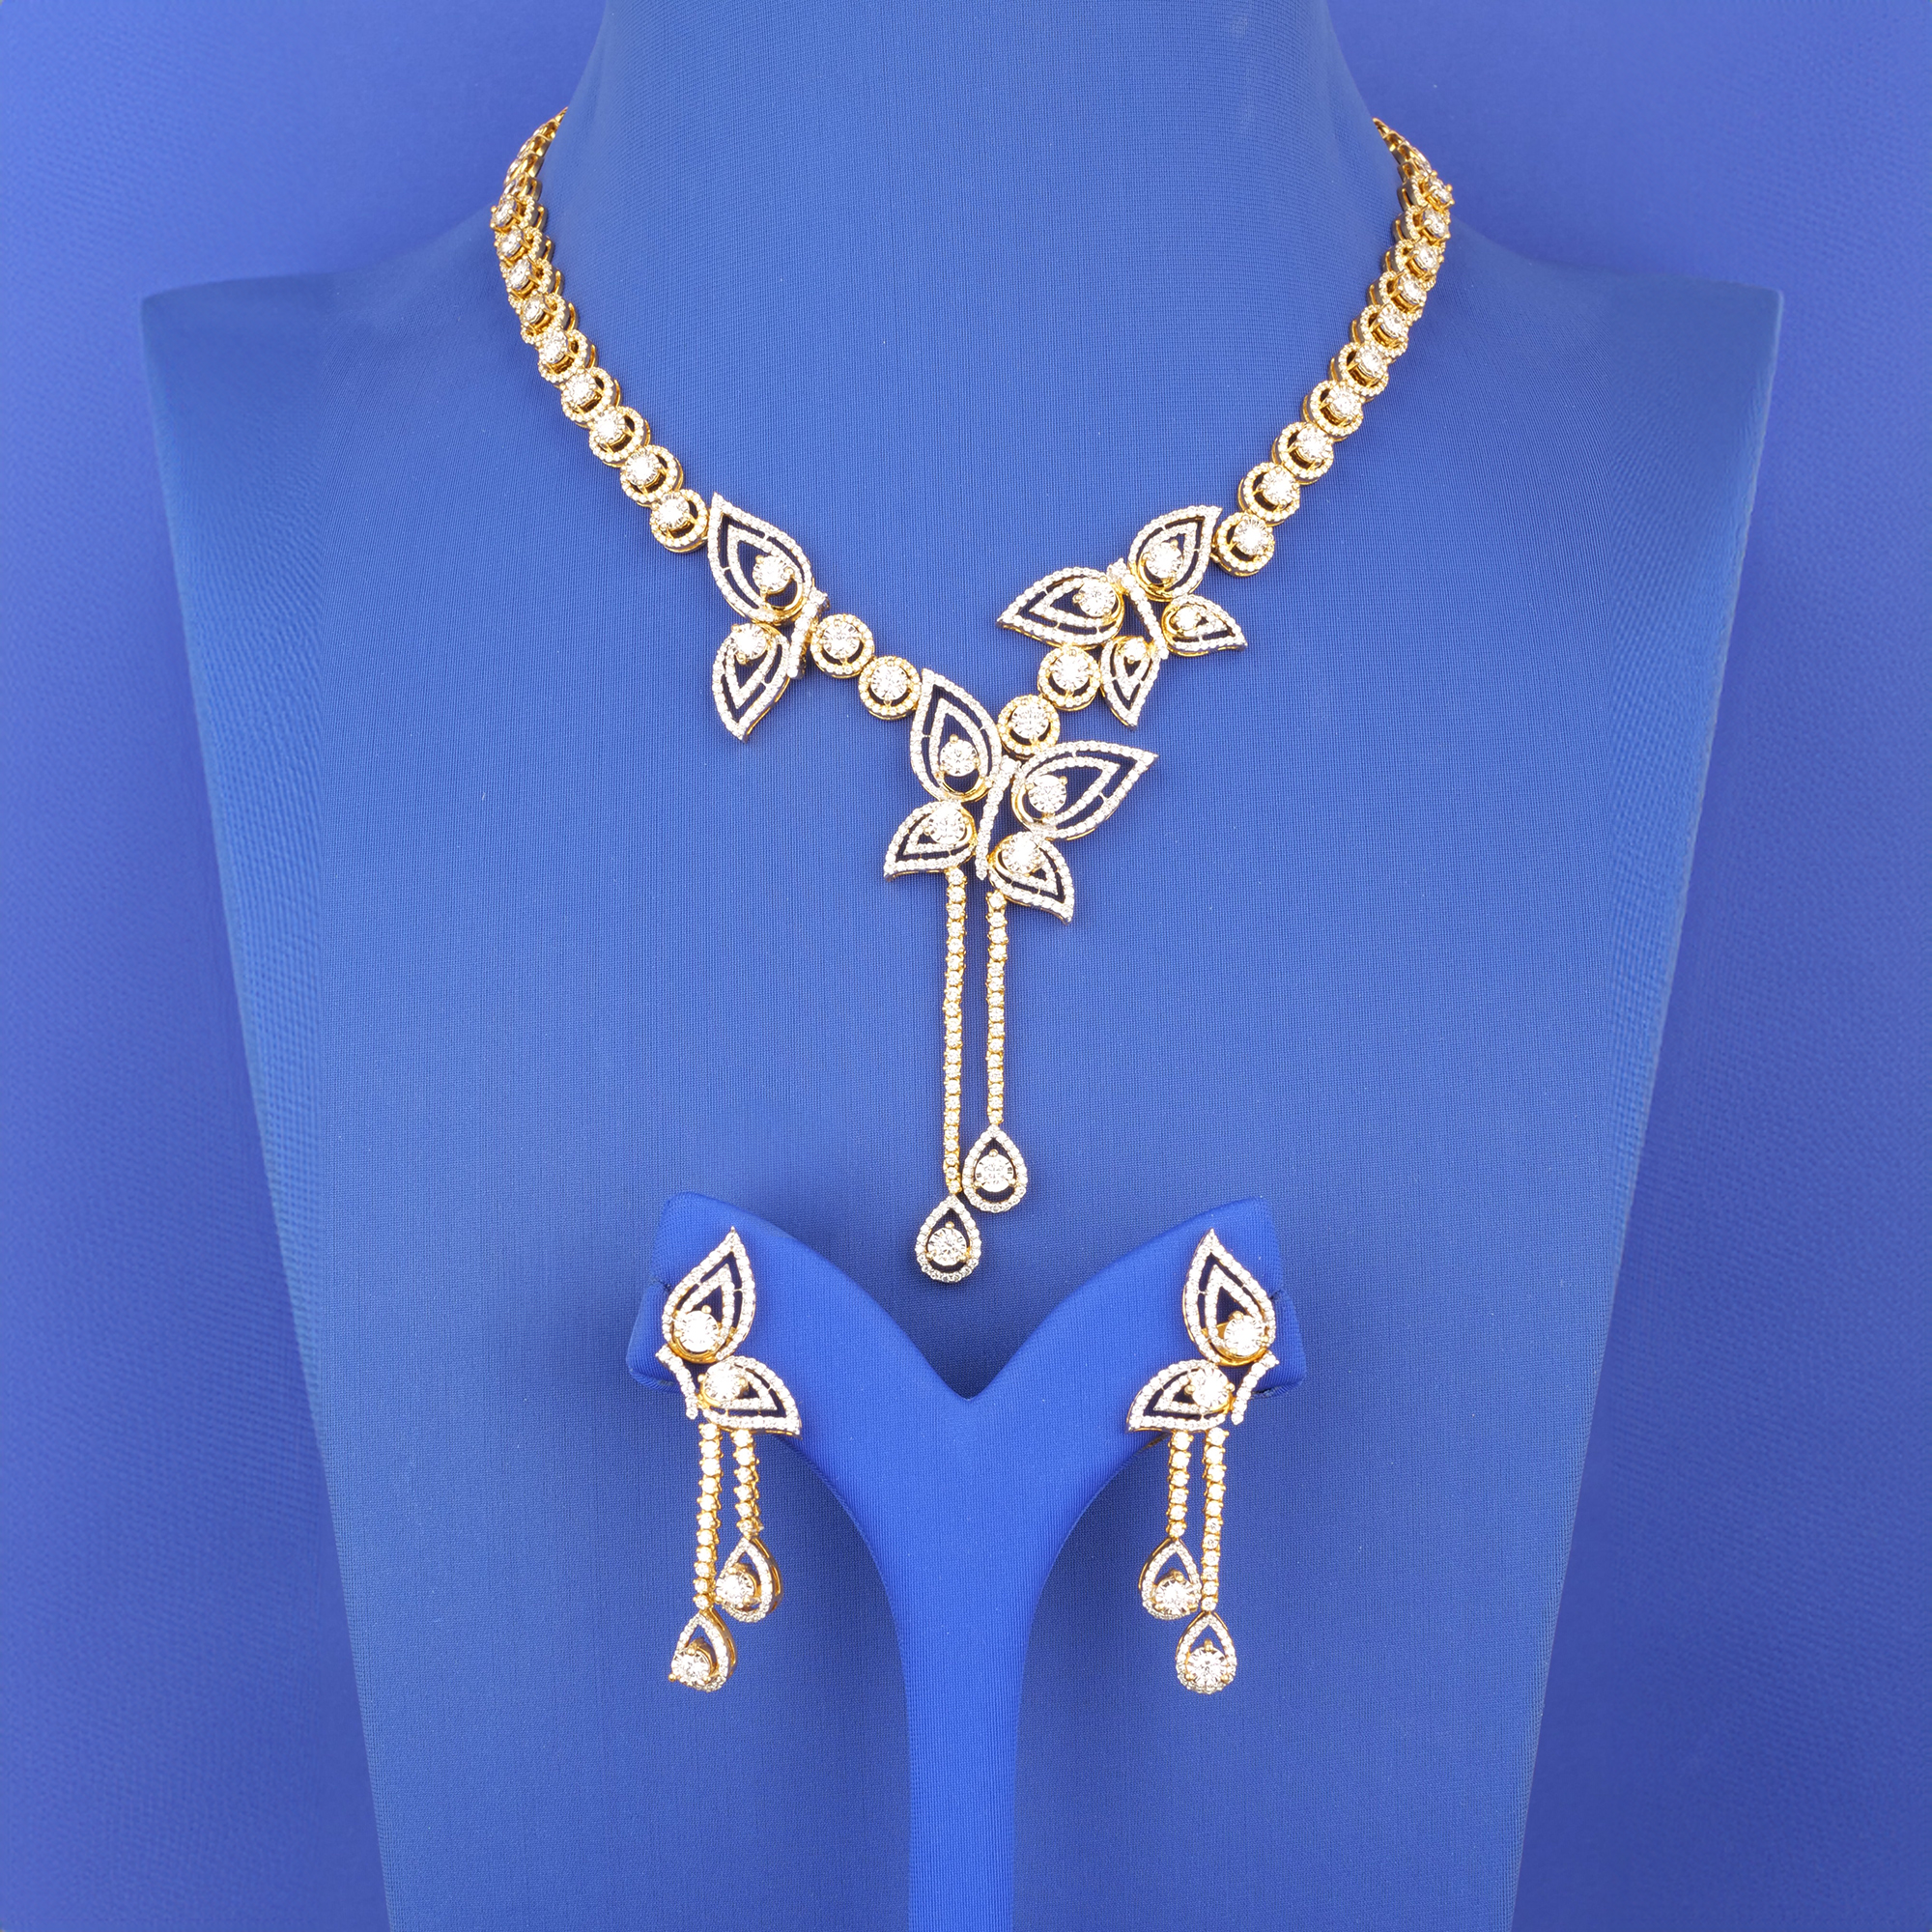 Handmade 18K yellow Gold Diamond Necklace and Earrings Set